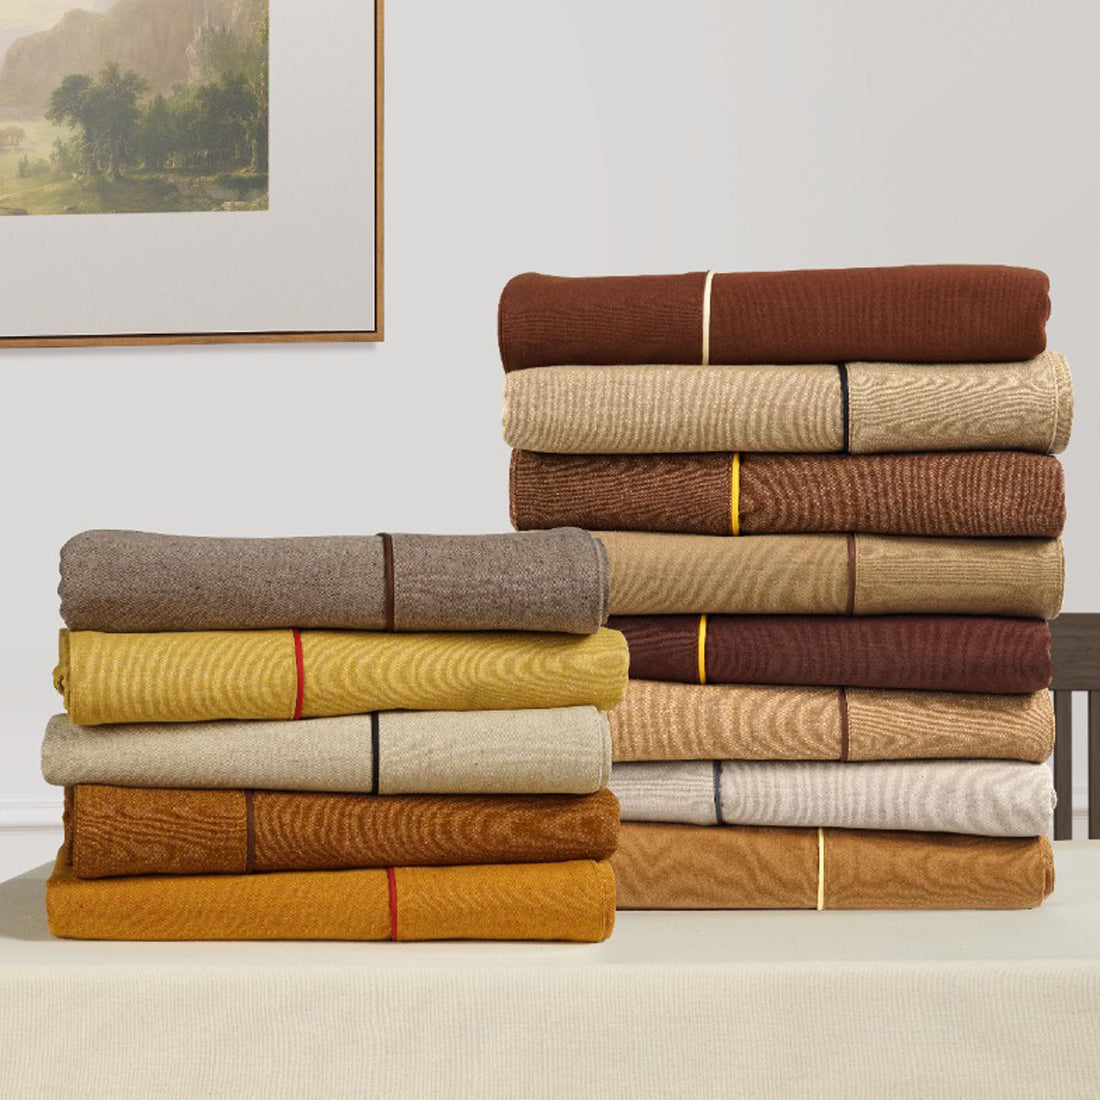 Soft Natural Brown Woven Cotton Plain Napkins Set online in India